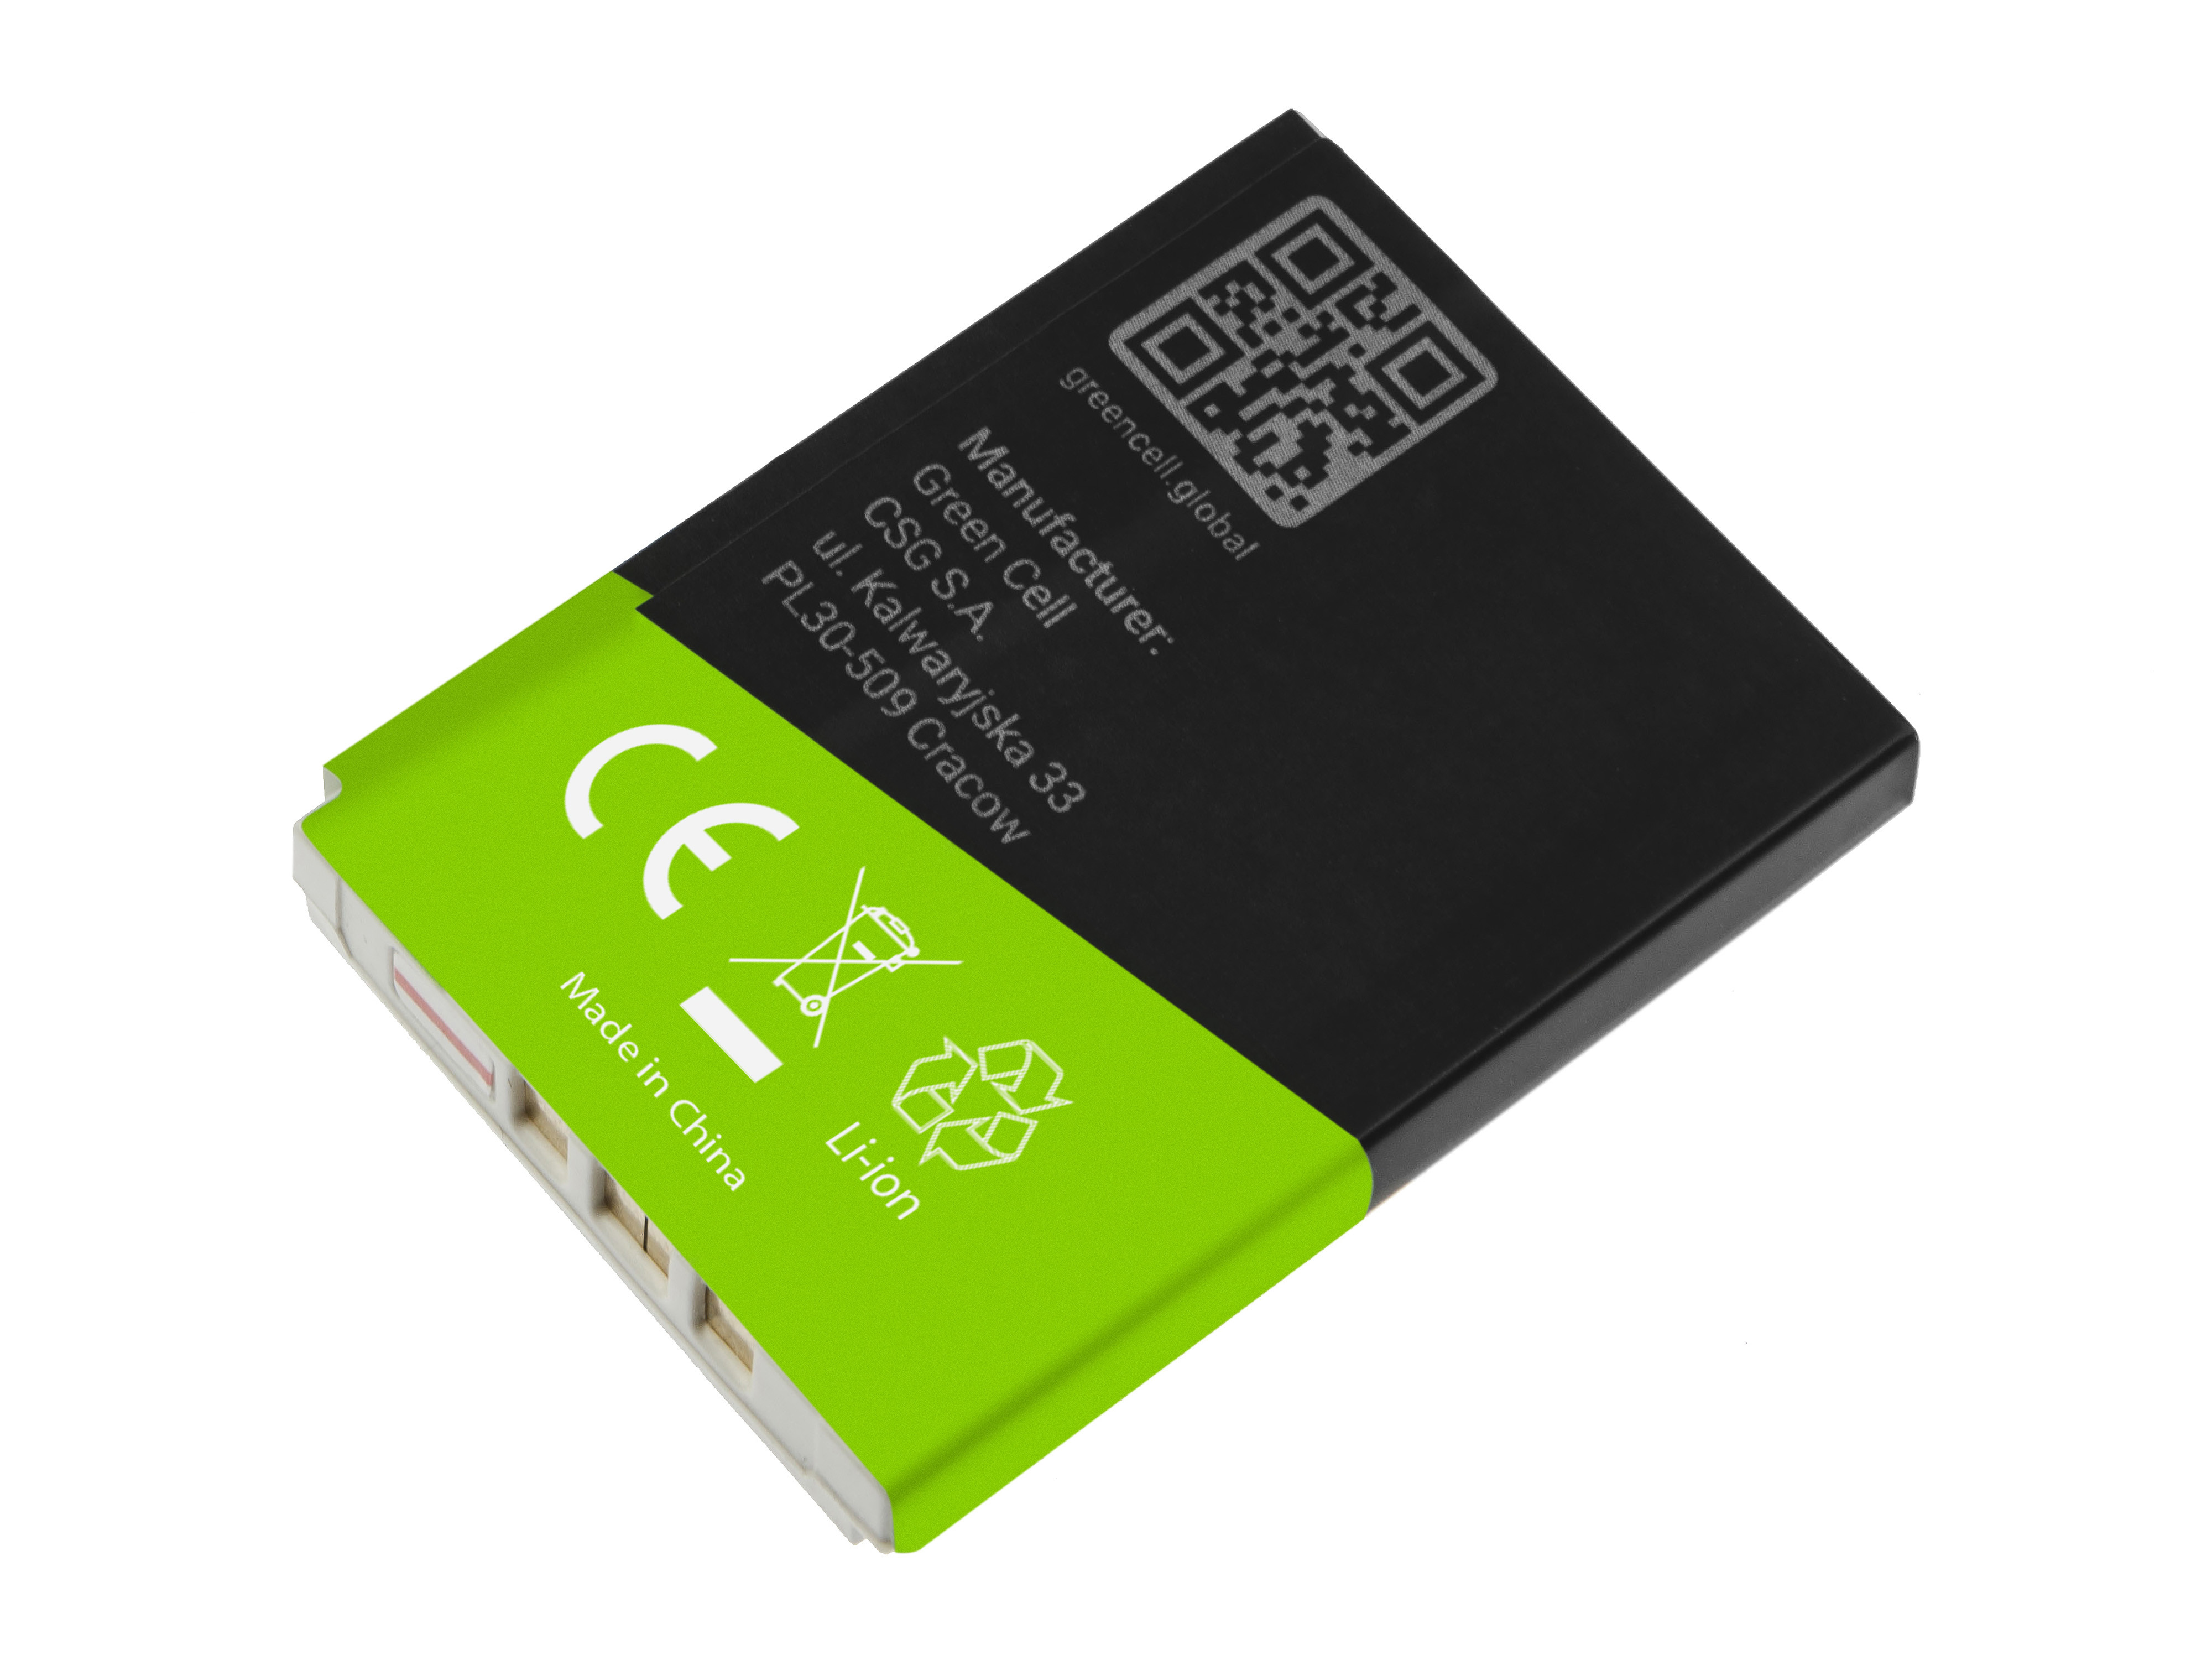 EOL-Green Cell Battery BLC-2 for smartphone Nokia 3310 3410 3510i